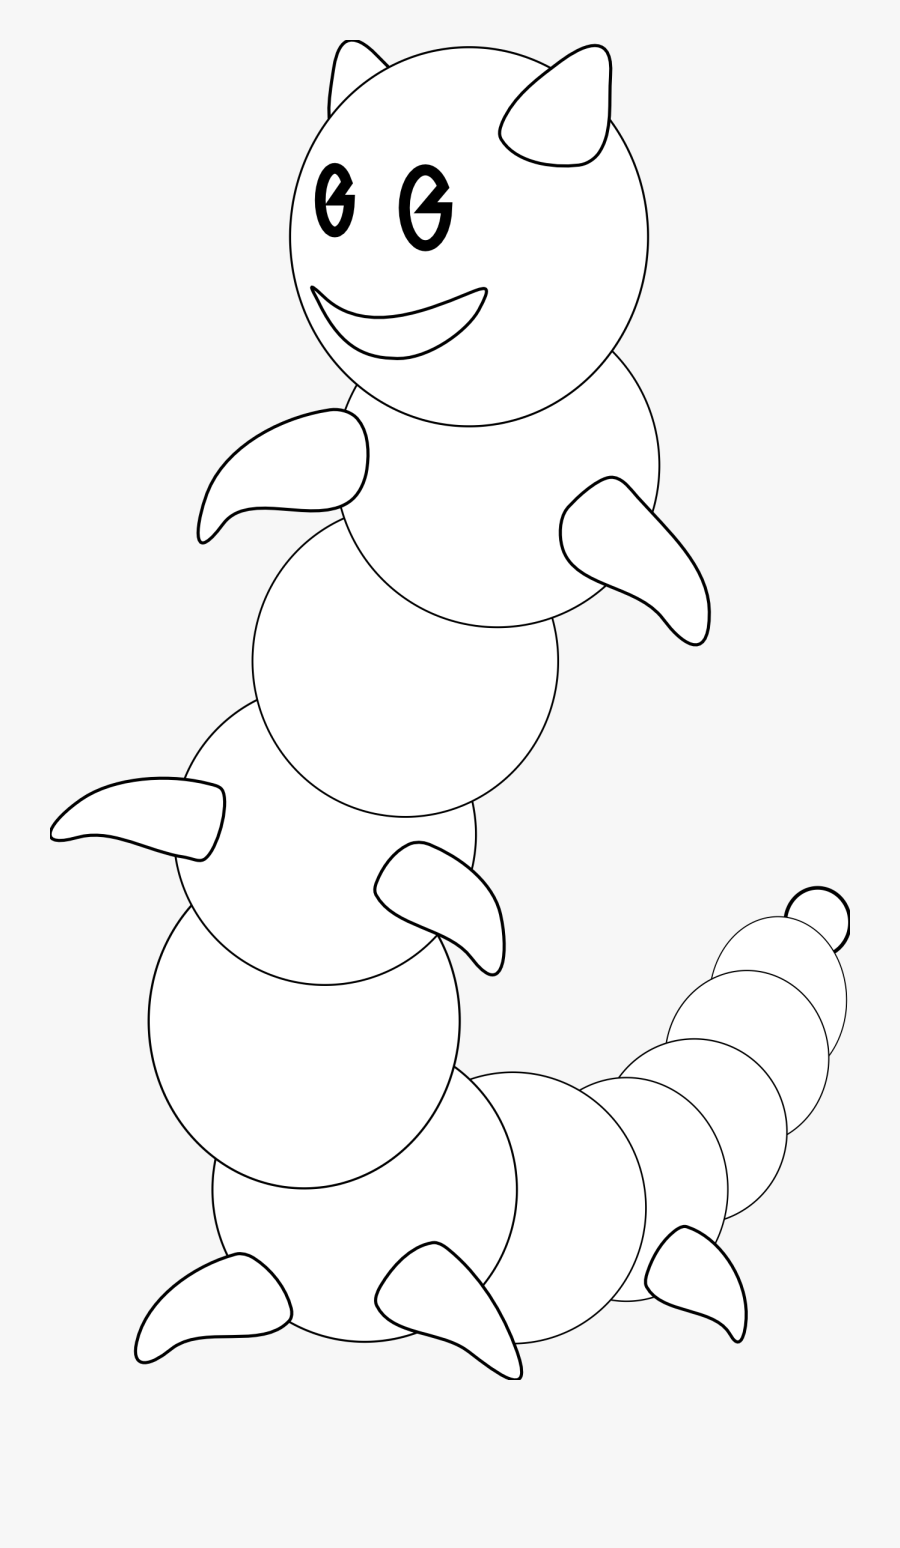 Caterpillar - Clipart - Black - And - White - Black And White Cartoon ...